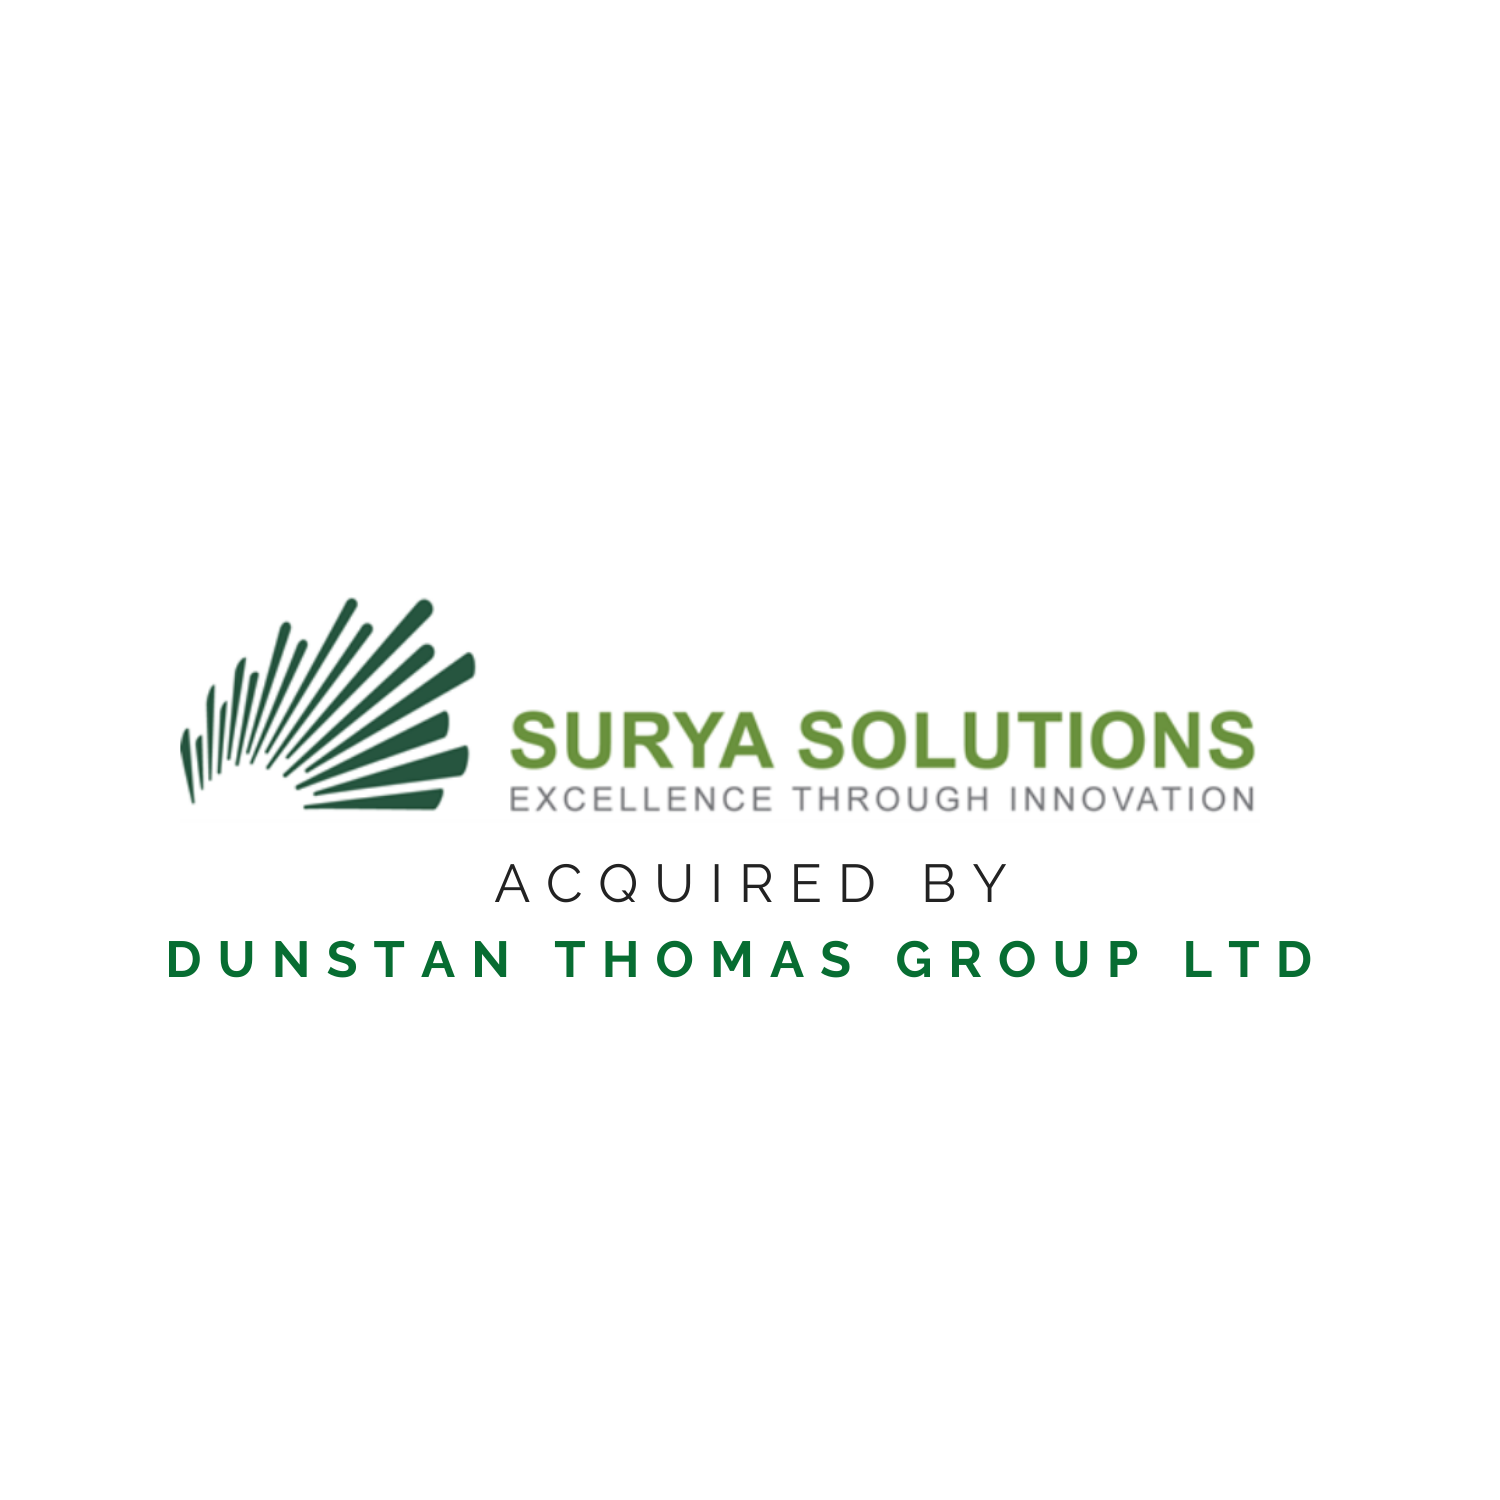 Sale of an IT Consulting, Solutions and Professional Services Company, UK and Mumbai